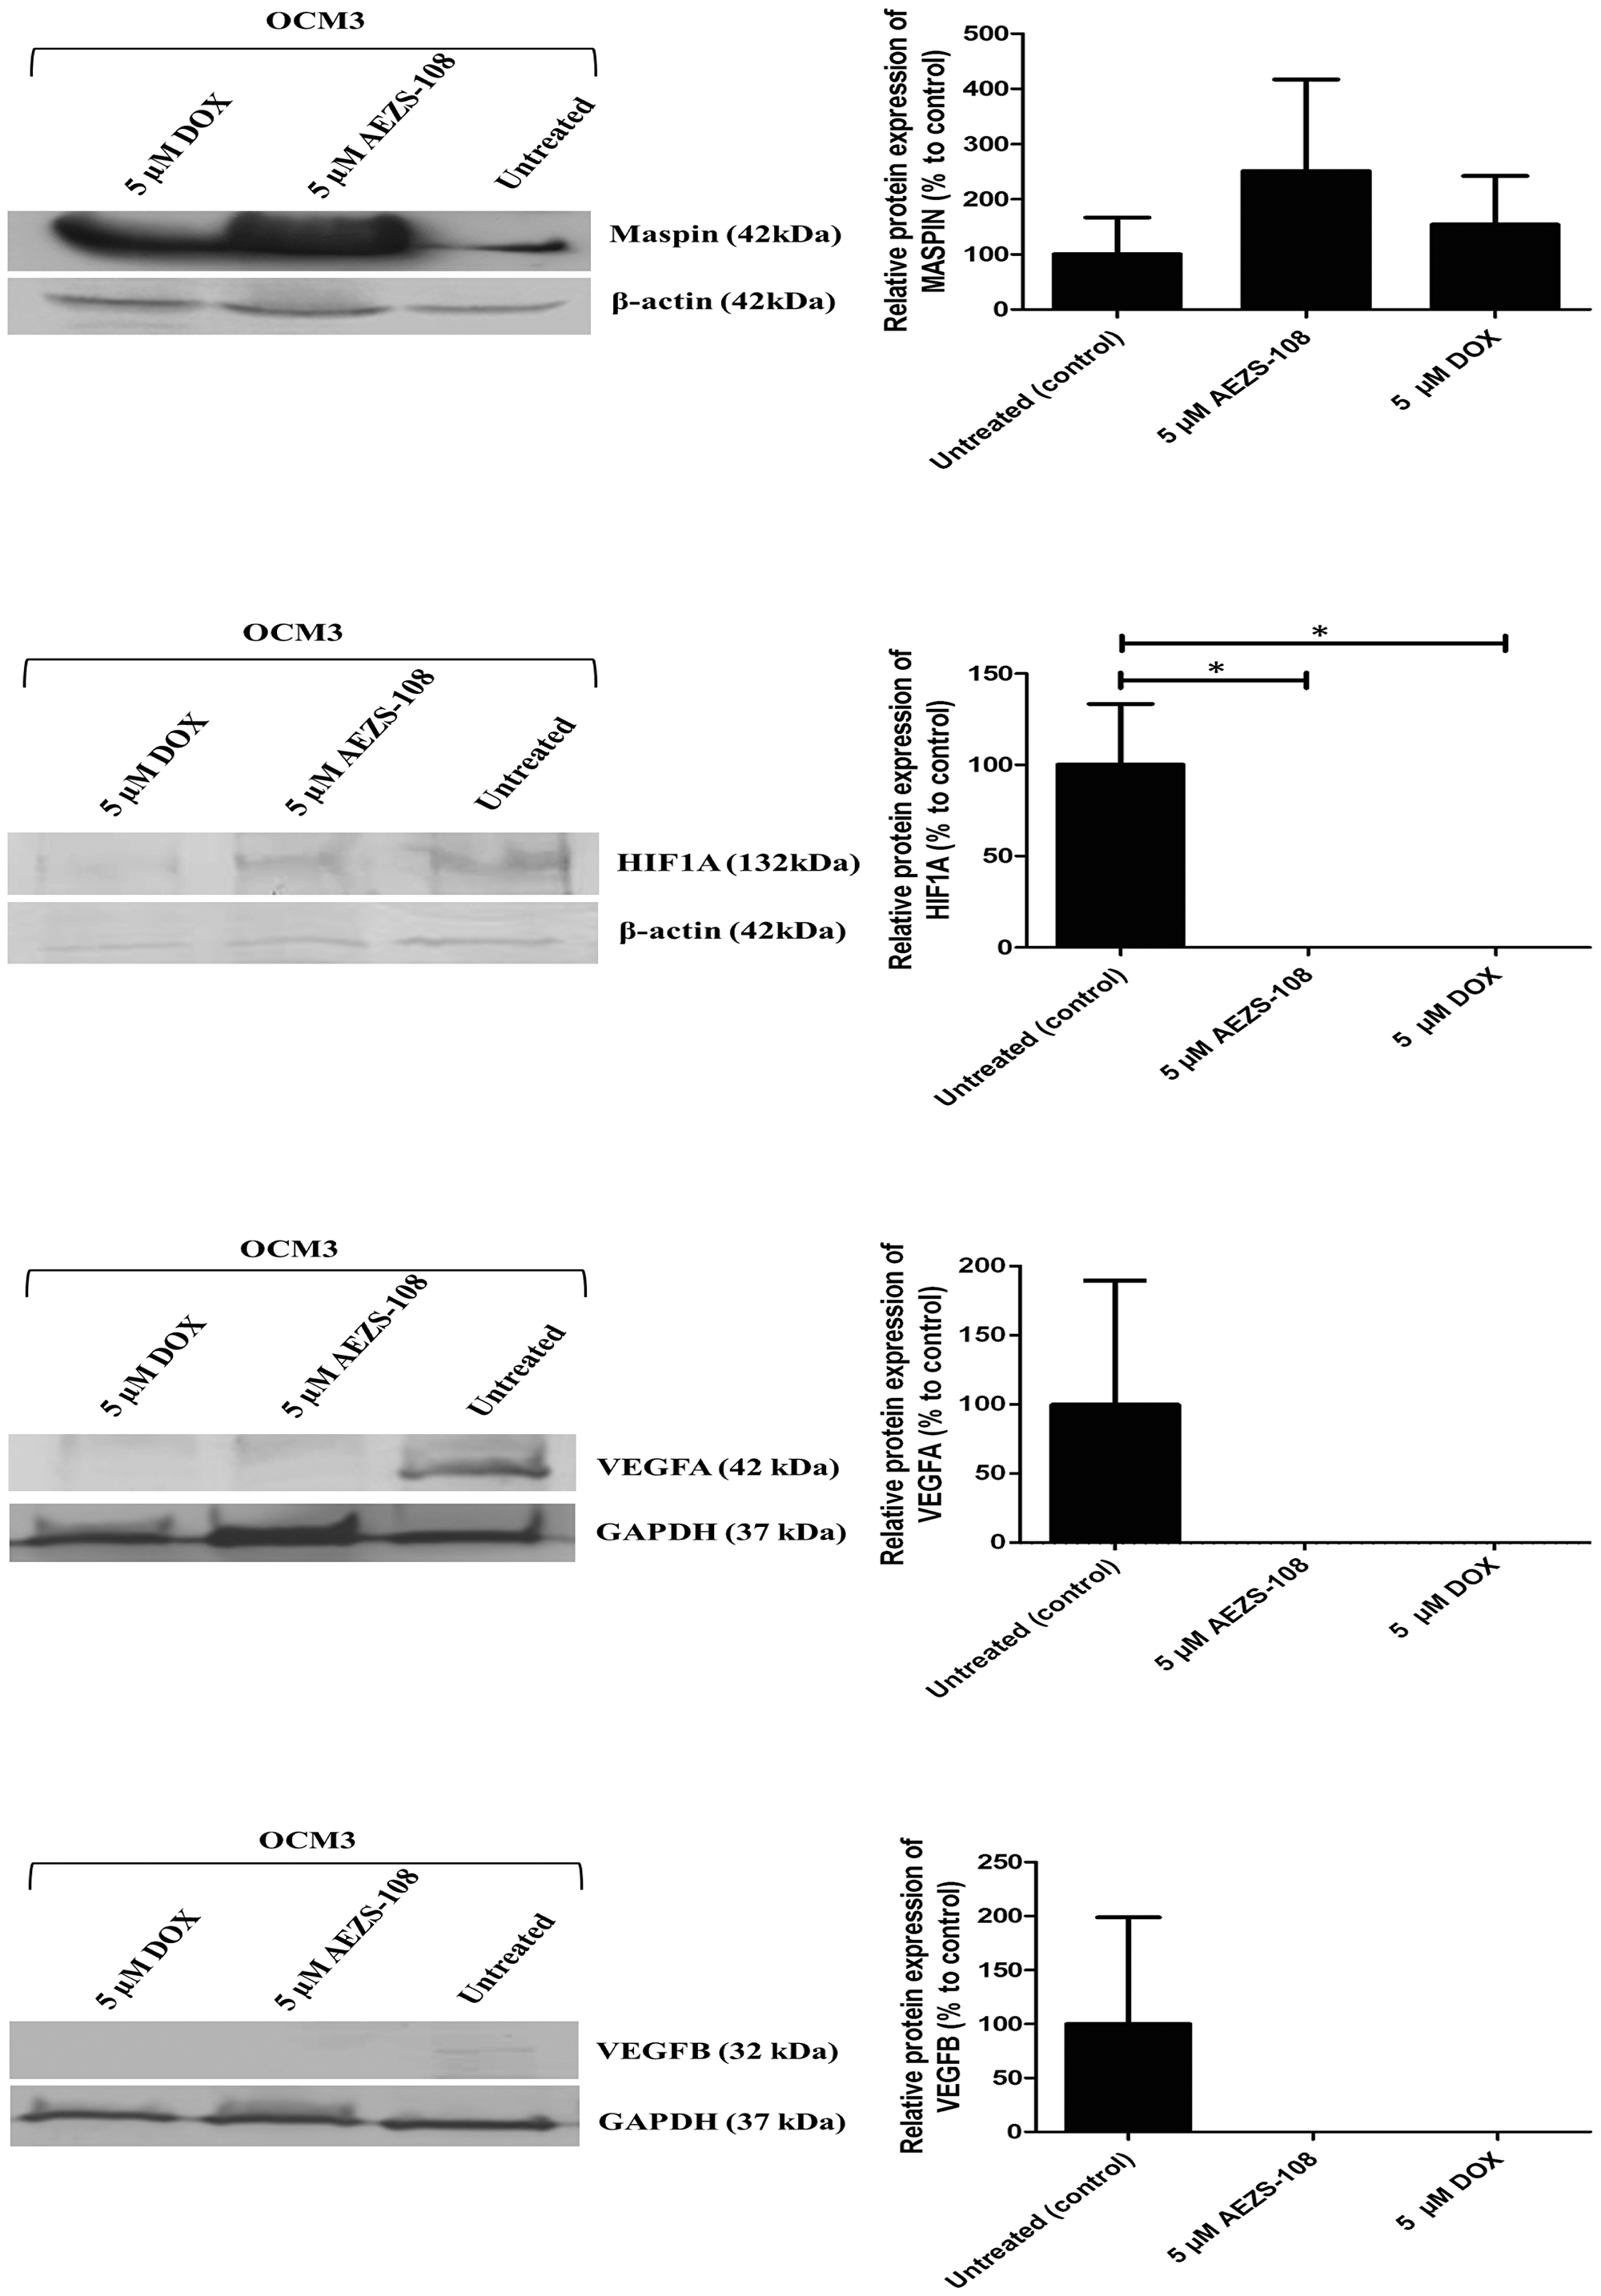 Western blot analysis of MASPIN, HIF1A, VEGFA and VEGFB protein expression after 24 hours of treatment with 5 µM AEZS-108 and 5 µM free DOX treatments from OCM3 cells.